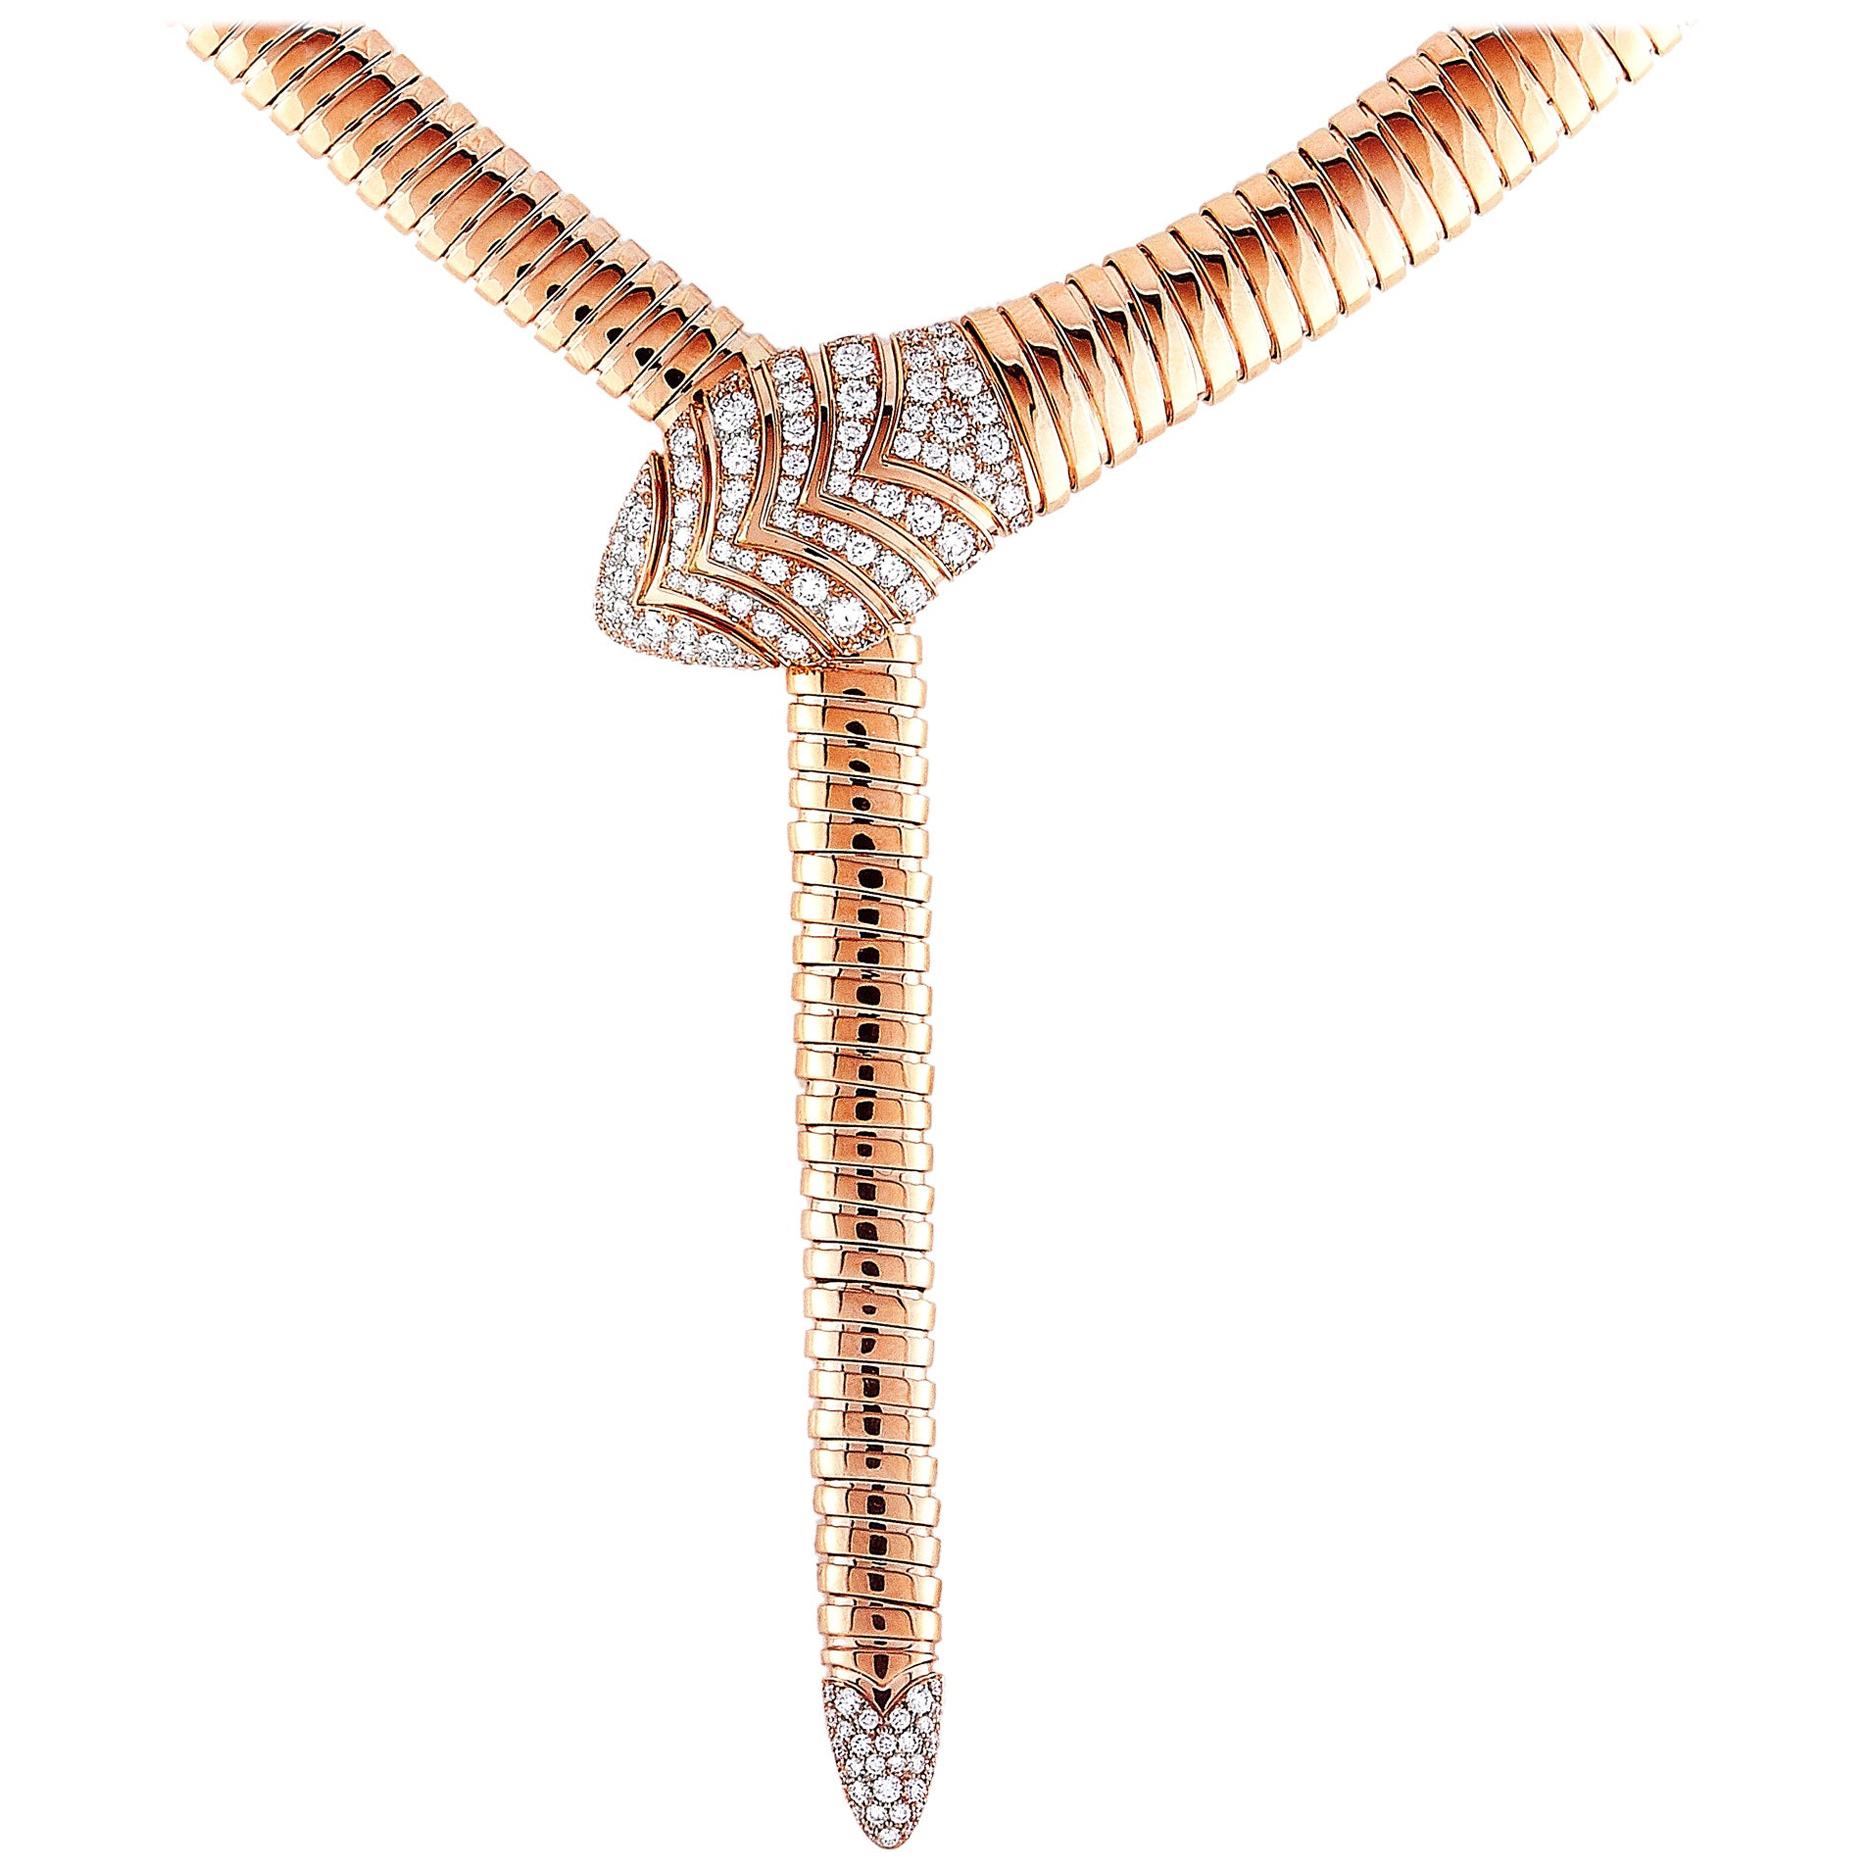 Bulgari Serpenti Necklace | Jewelry, Gorgeous jewelry, Forever necklace